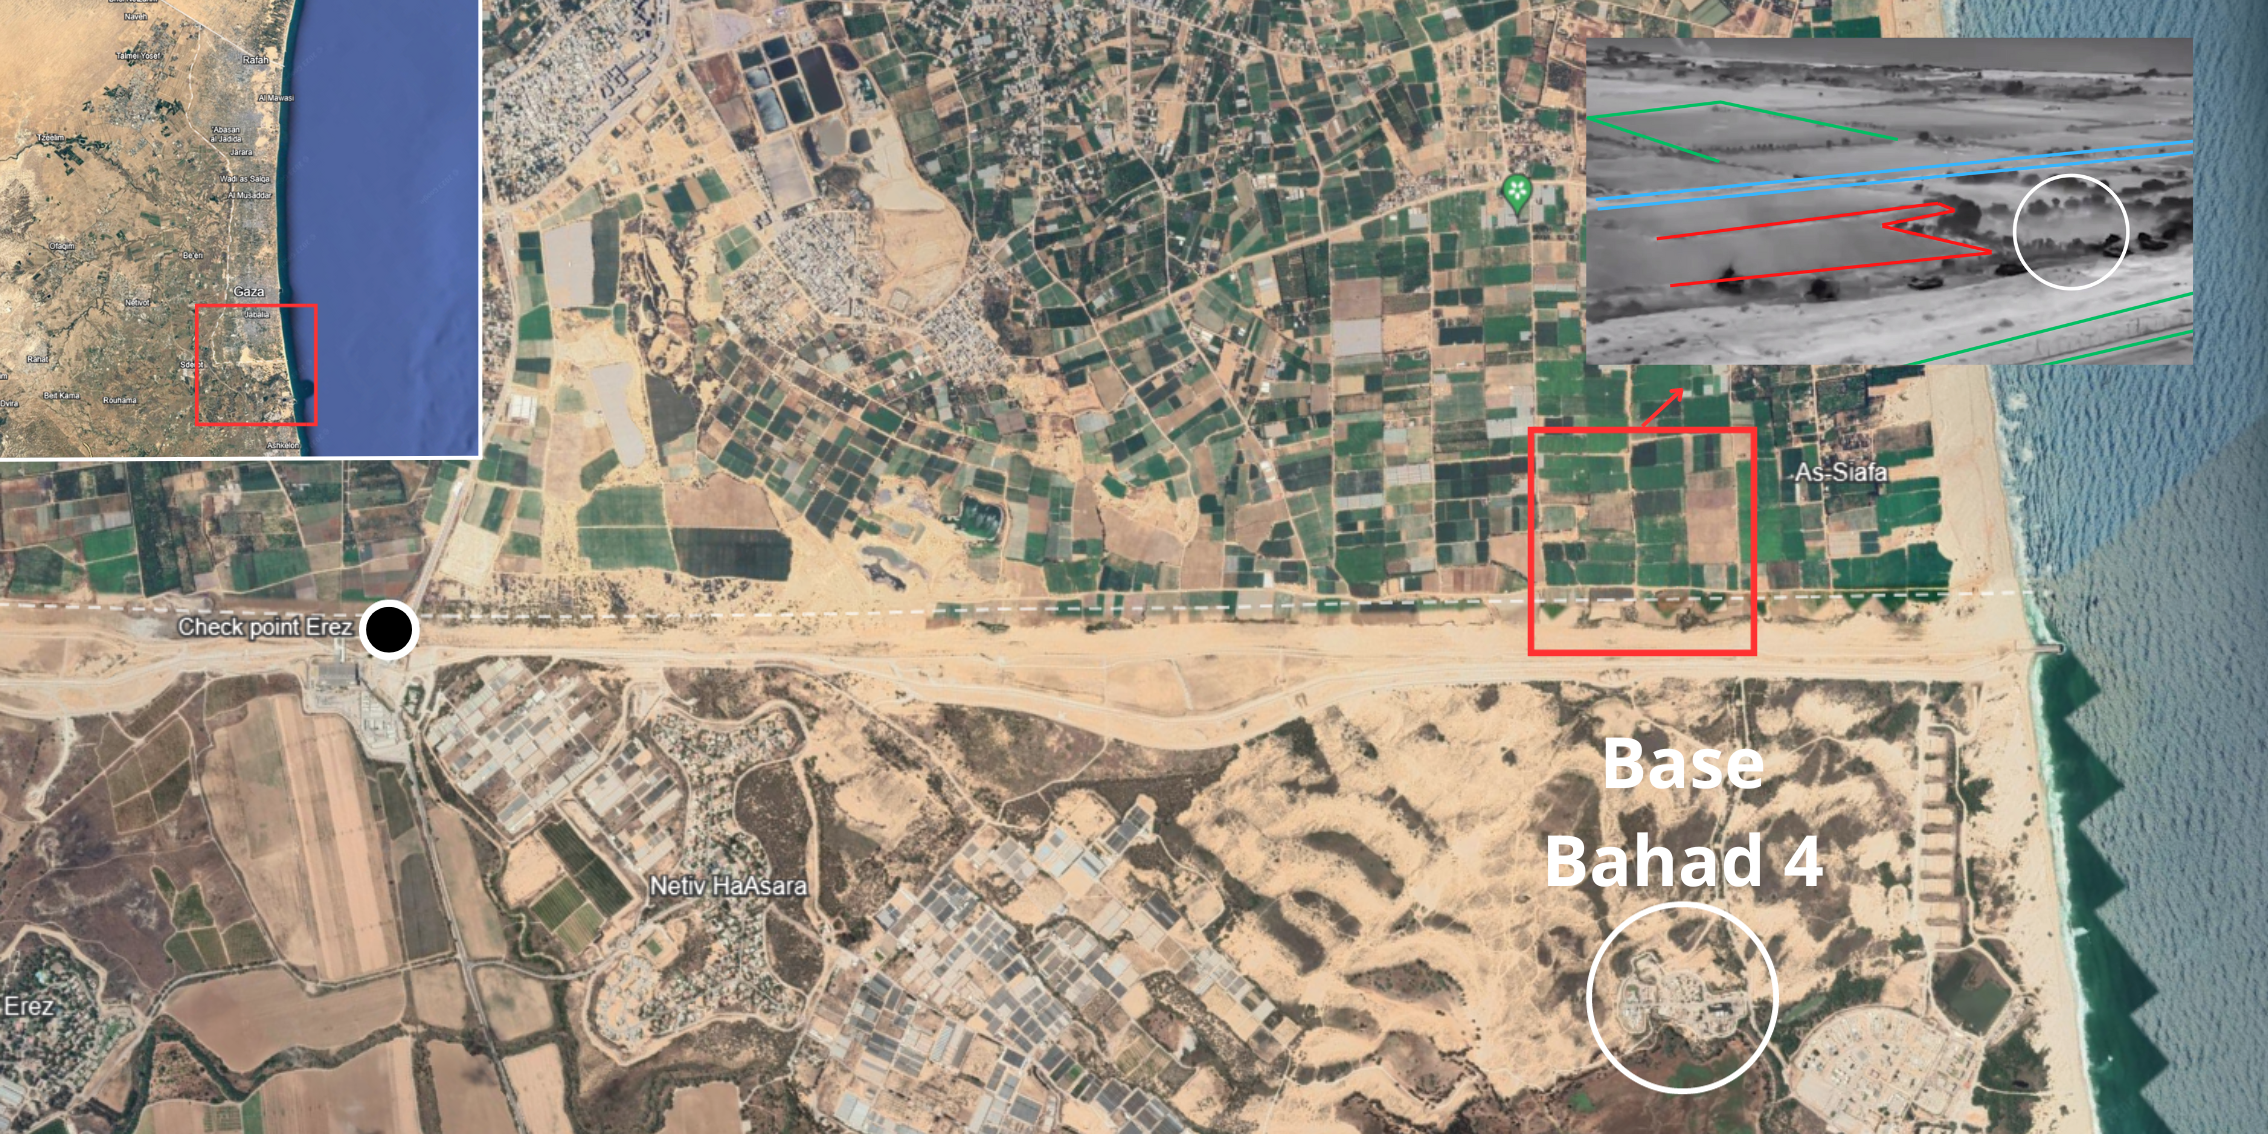 The incursion took place just 5,300 meters from the Erez crossing point.